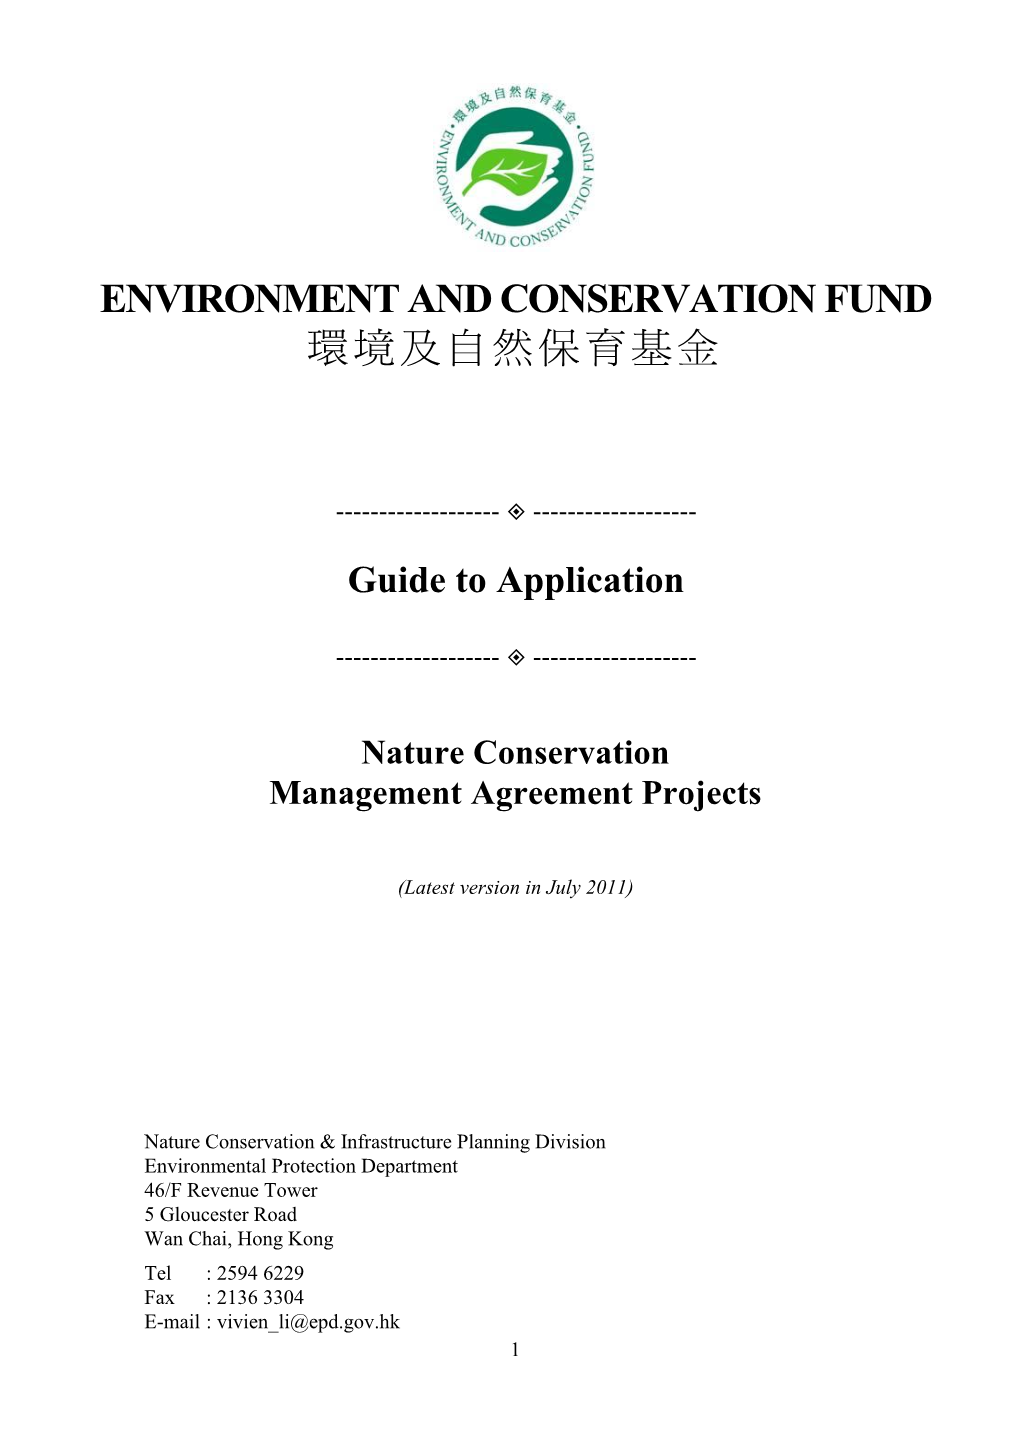 Nature Conservation Management Agreement Projects